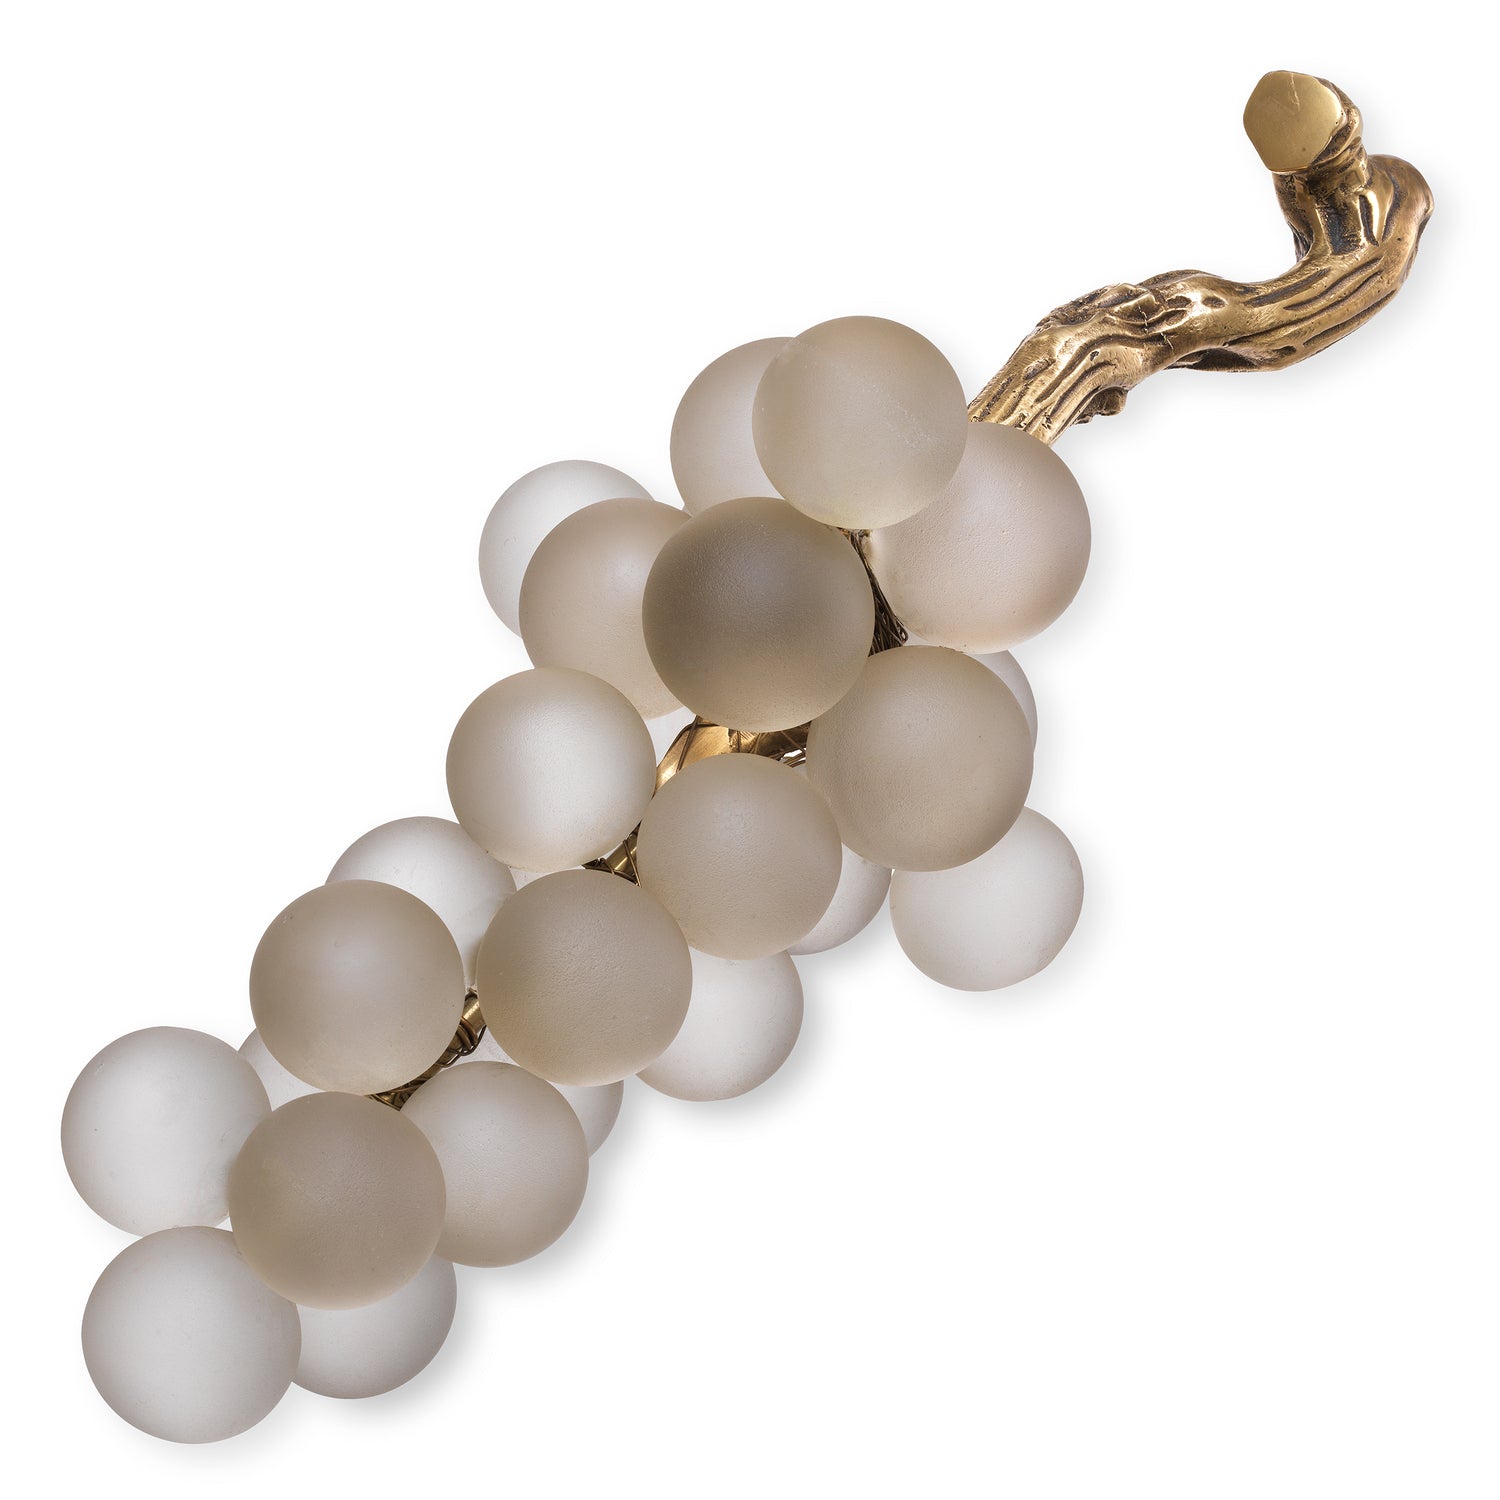 Object French Grapes